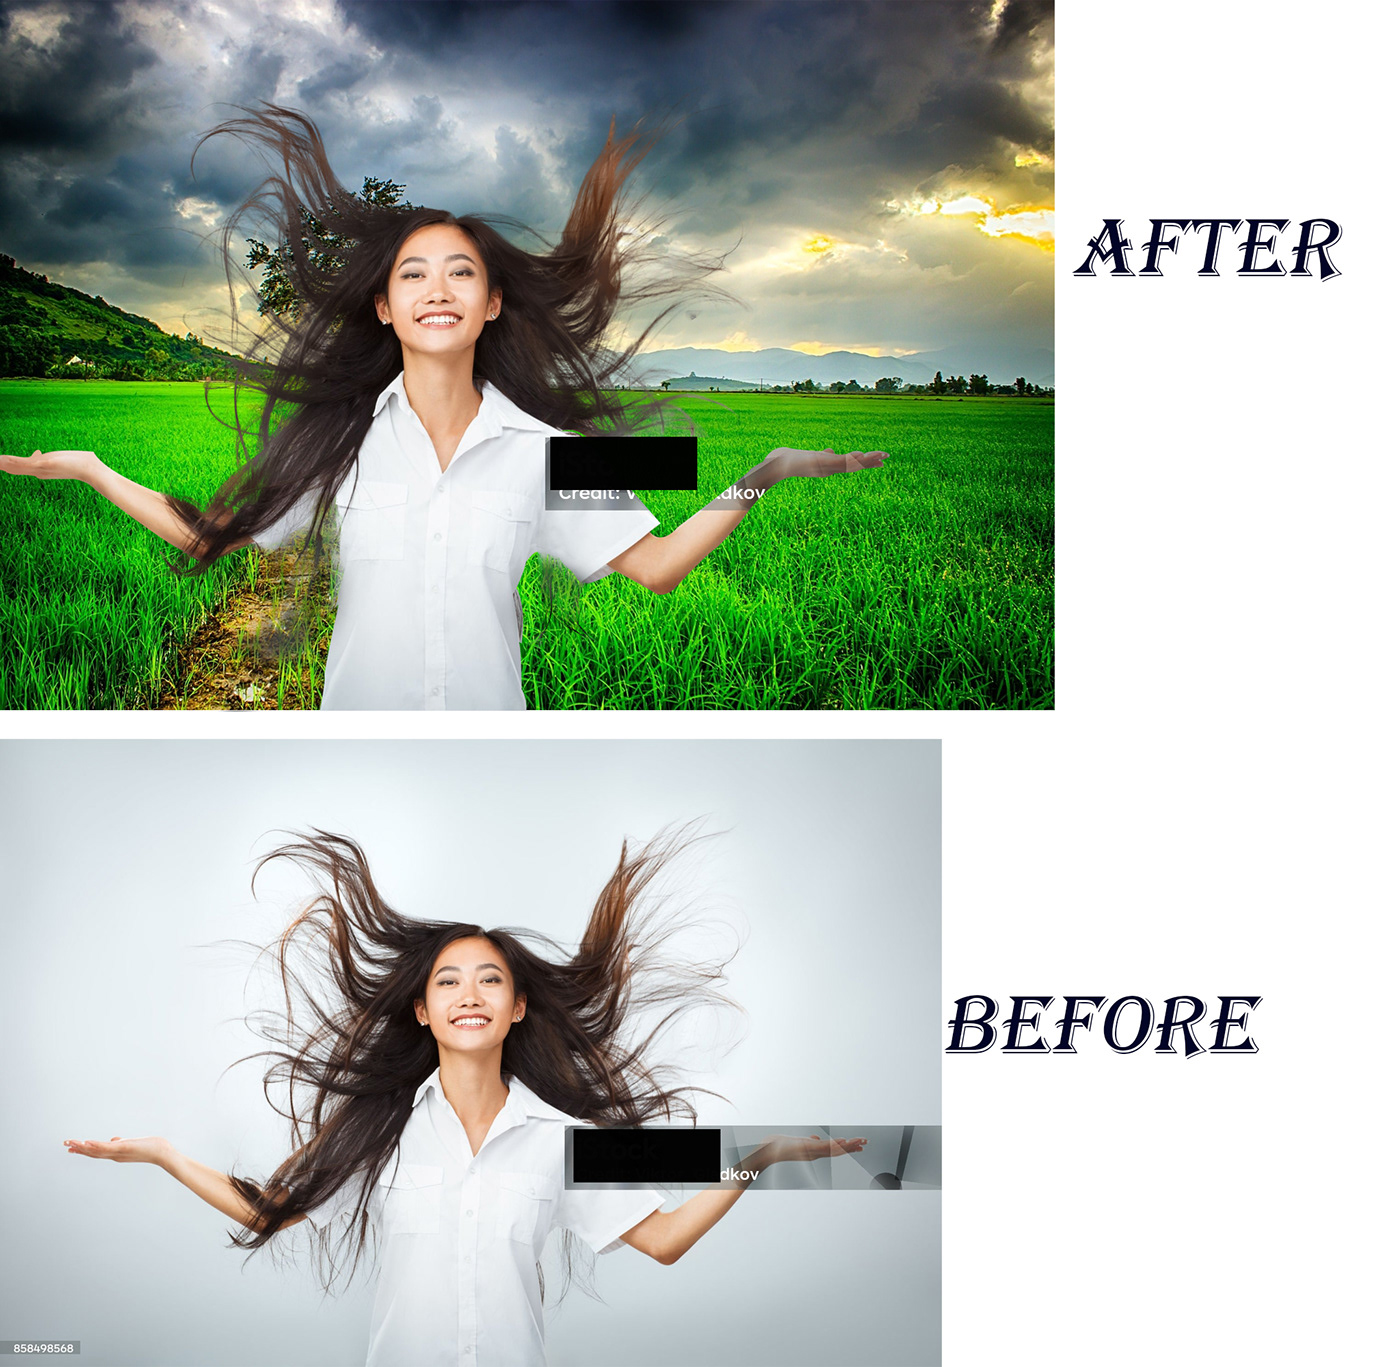 hair masking Background Remove Clipping path Background removal photo editing retouching  photoshoot Image Editing Photo Retouching hair masking in photoshop